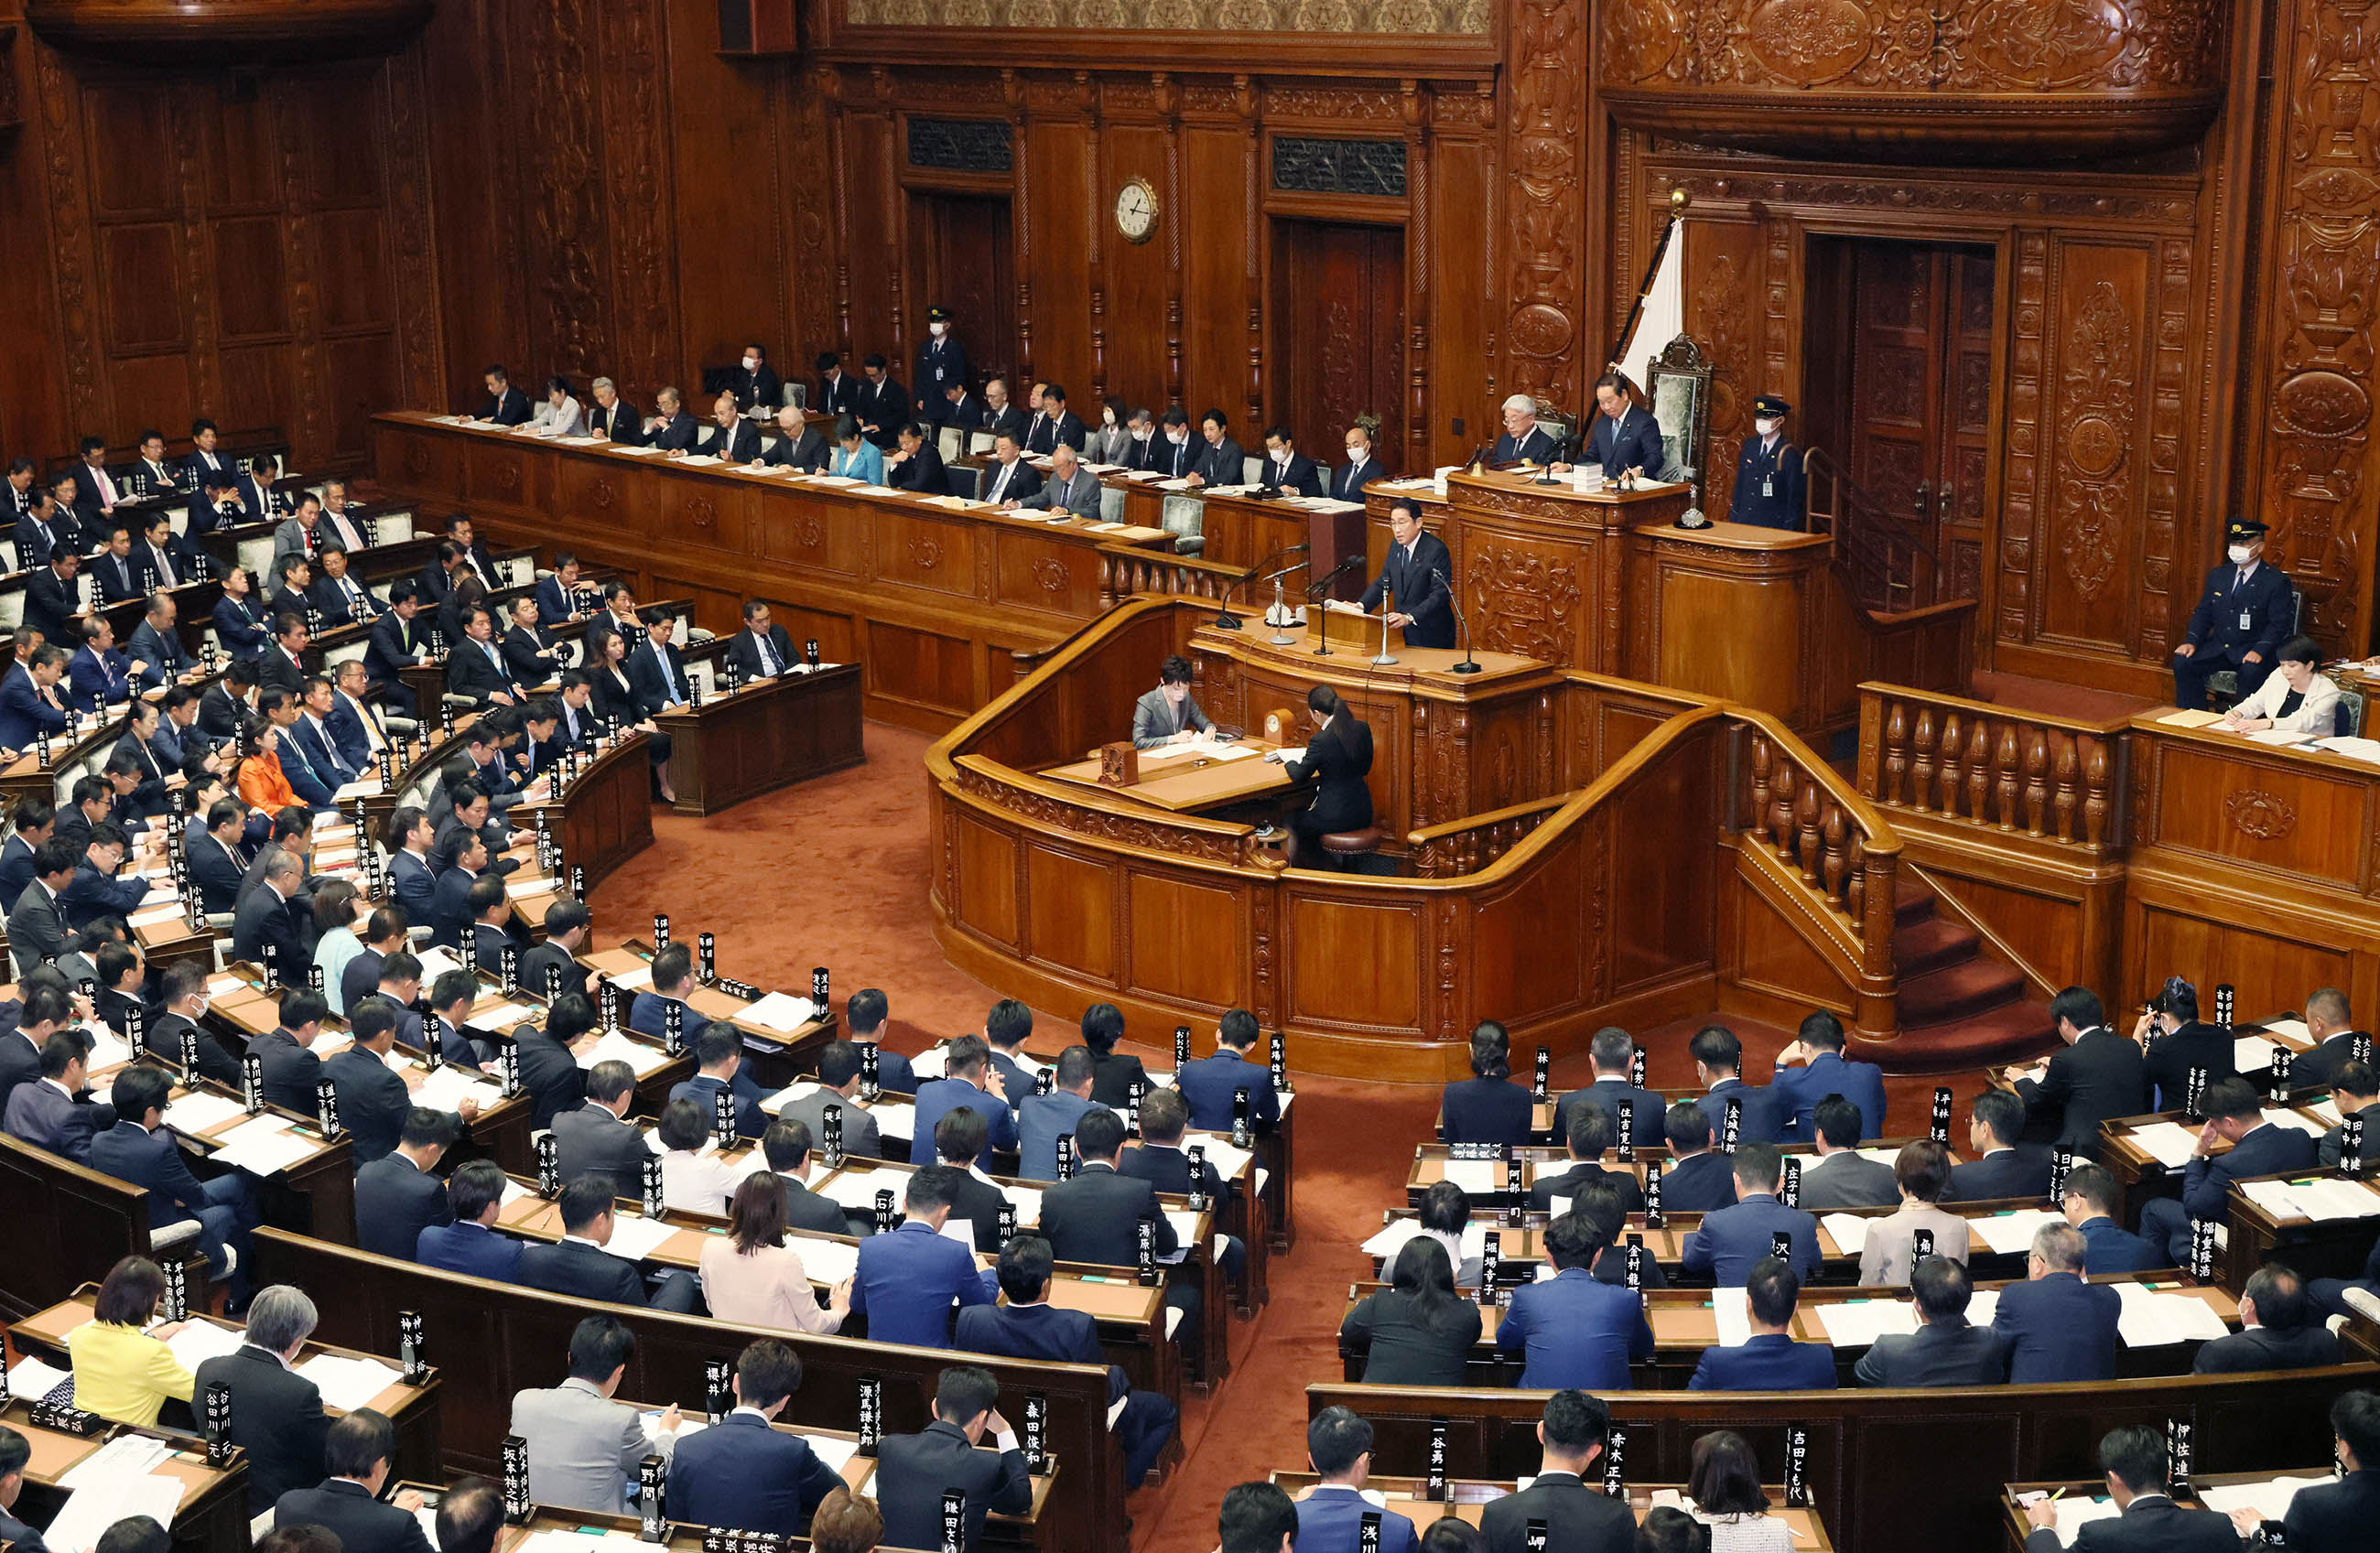 Prime Minister Kishida delivering a policy speech during the plenary session of the House of Representatives (10)